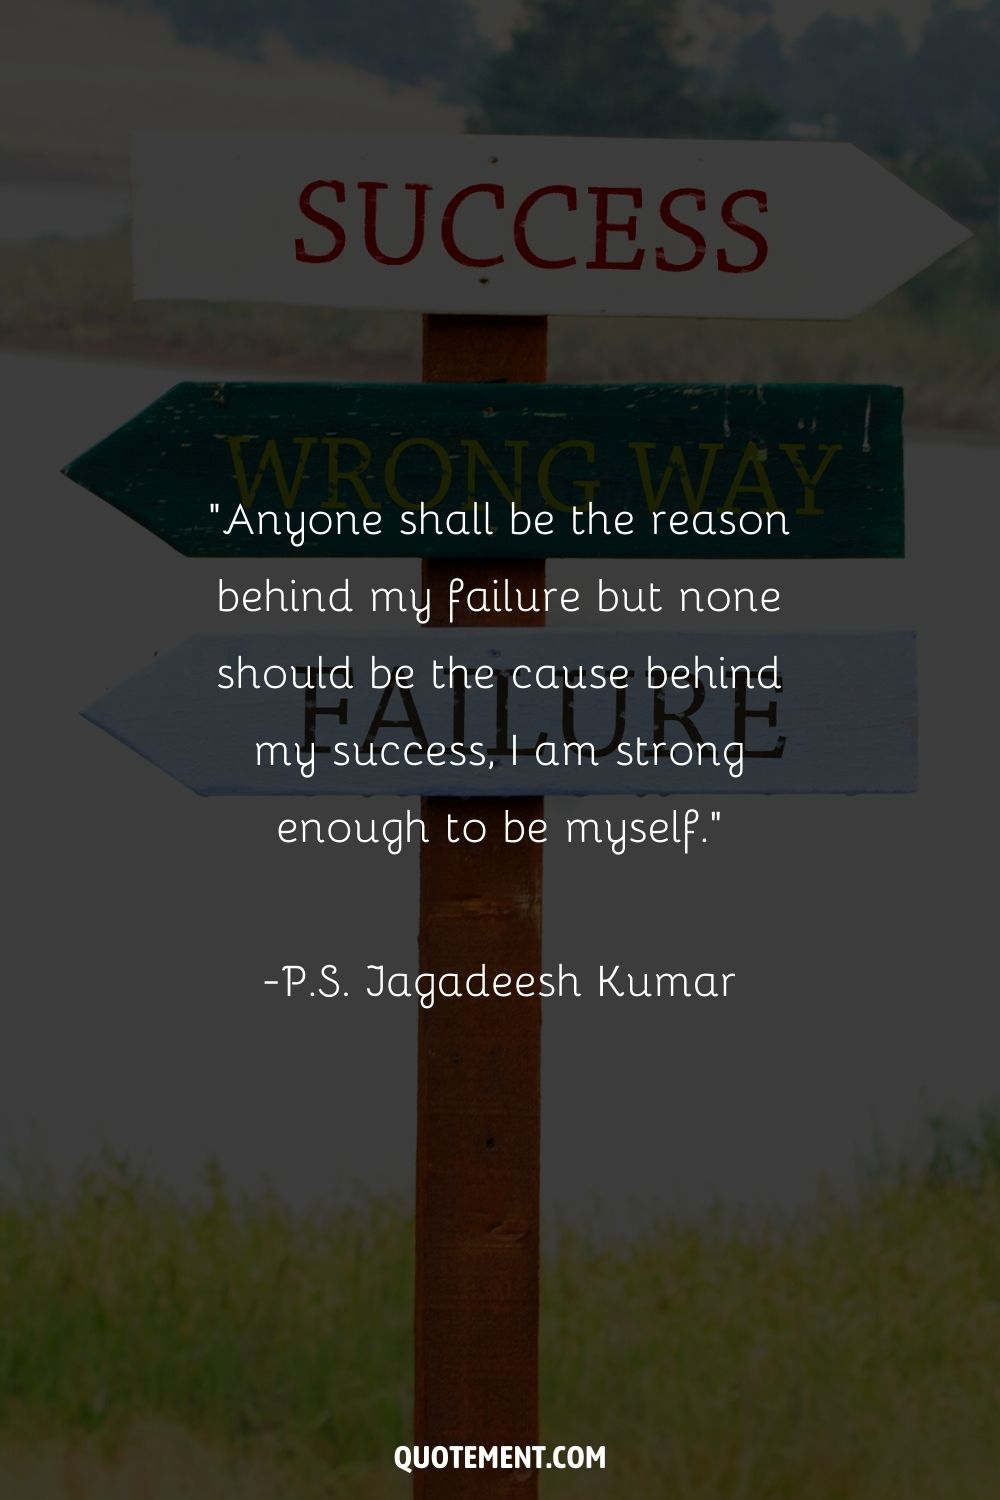 “Anyone shall be the reason behind my failure but none should be the cause behind my success, I am strong enough to be myself.” ― P.S. Jagadeesh Kumar